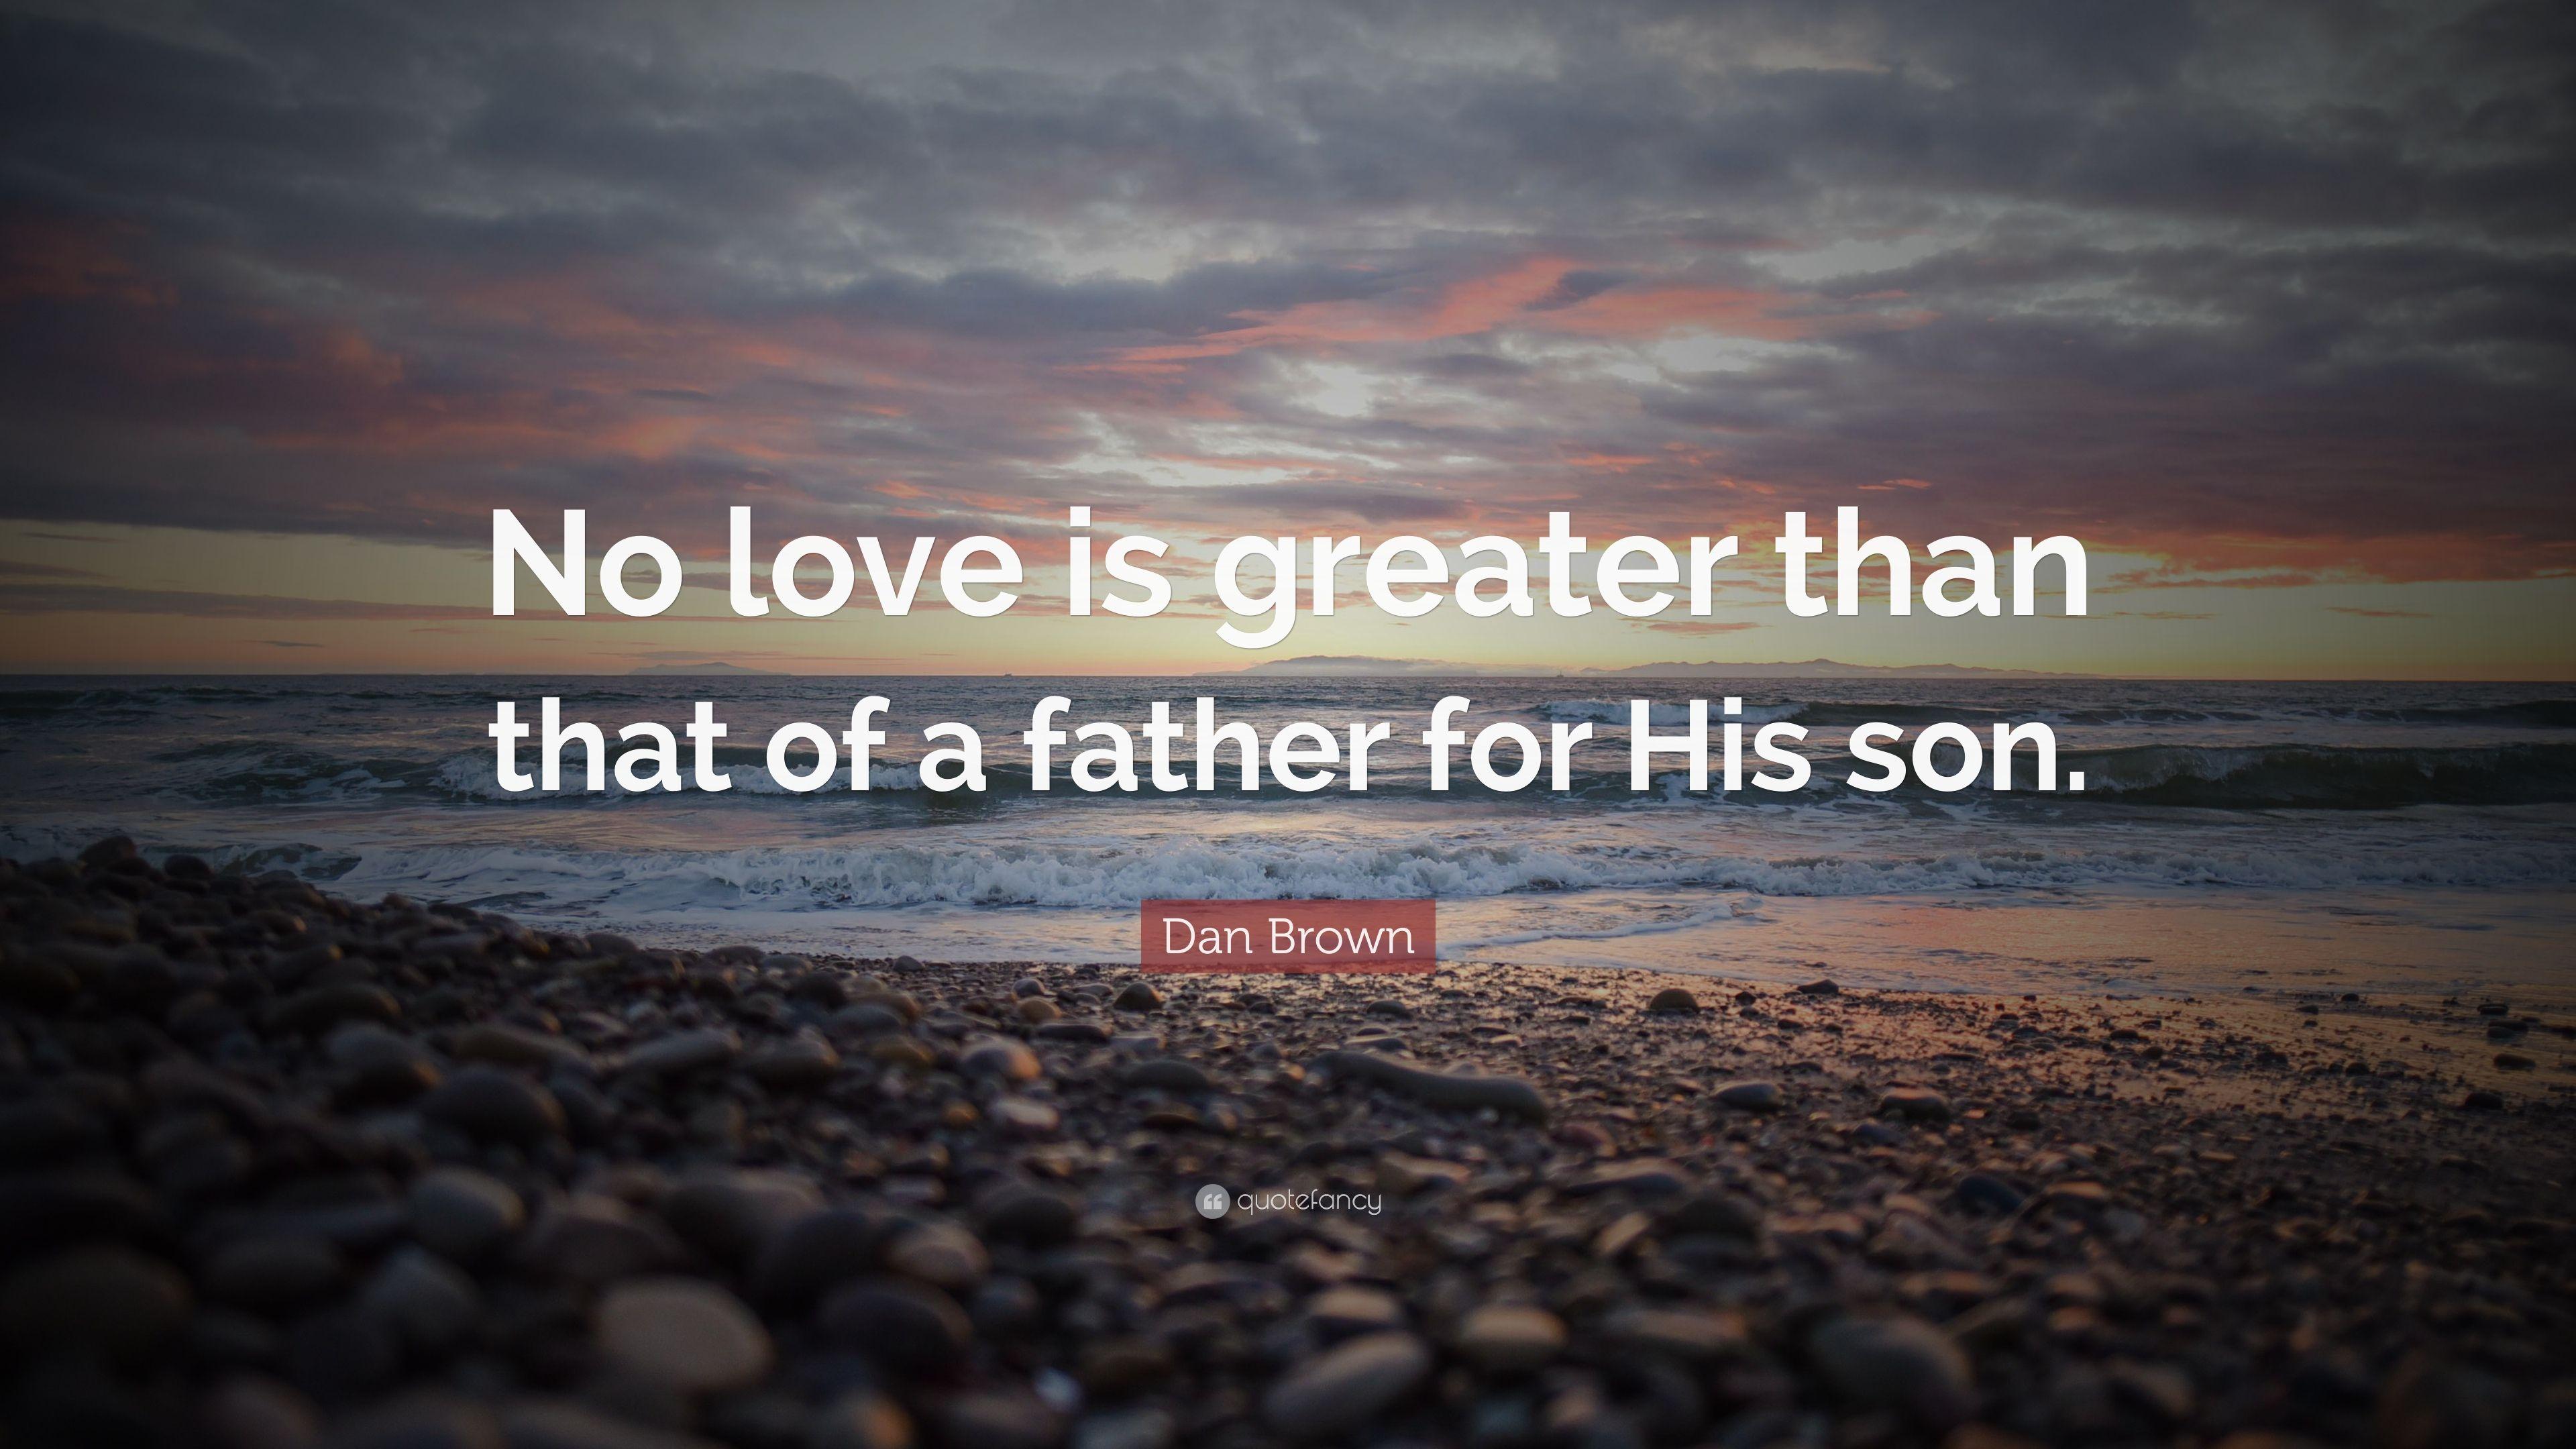 Dan Brown Quote: “No love is greater than that of a father for His